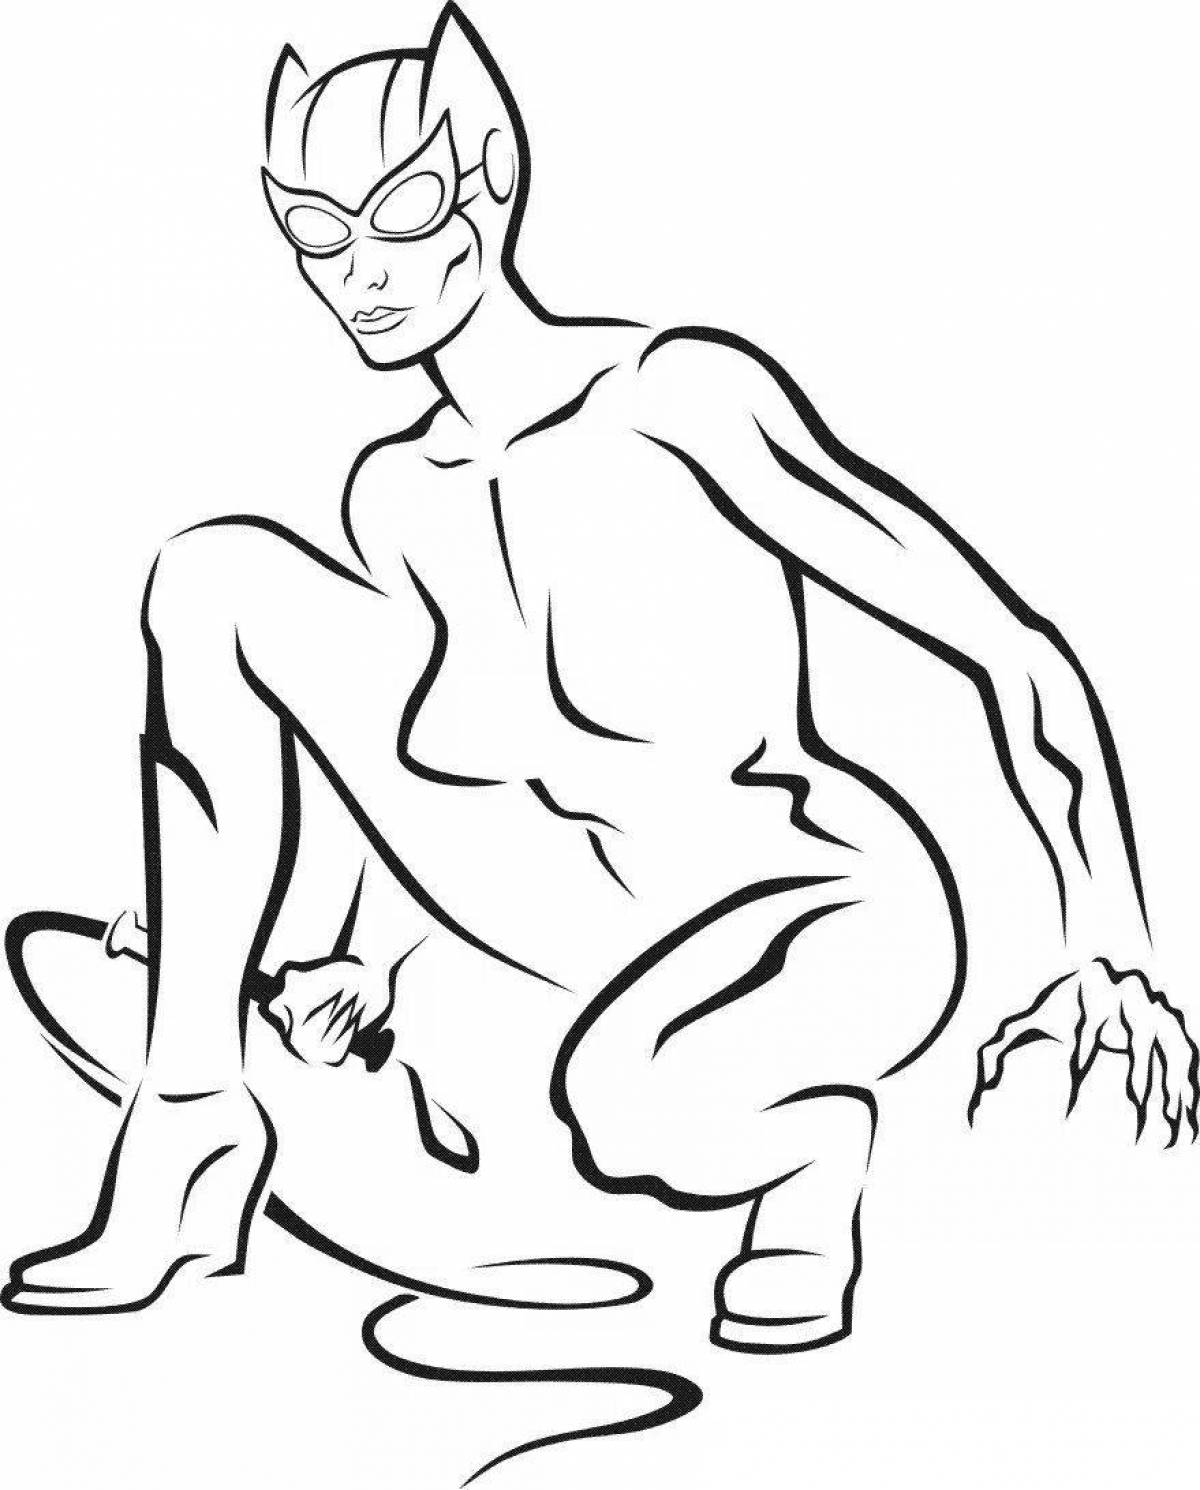 Coloring page of the dazzling catwoman